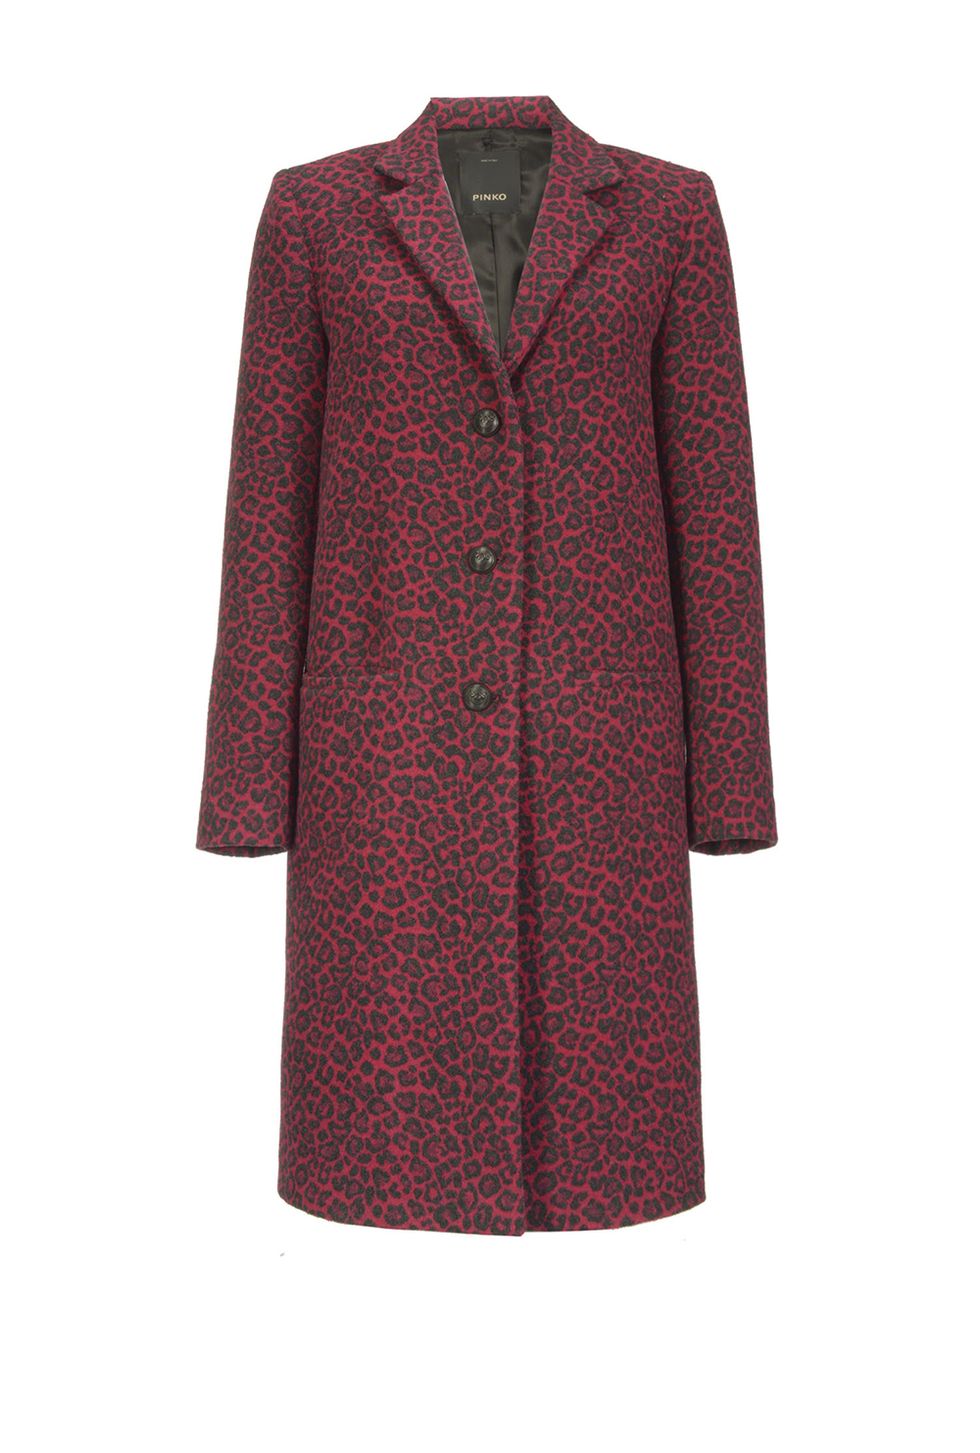 Clothing, Outerwear, Coat, Red, Sleeve, Maroon, Violet, Overcoat, Dress, Collar, 